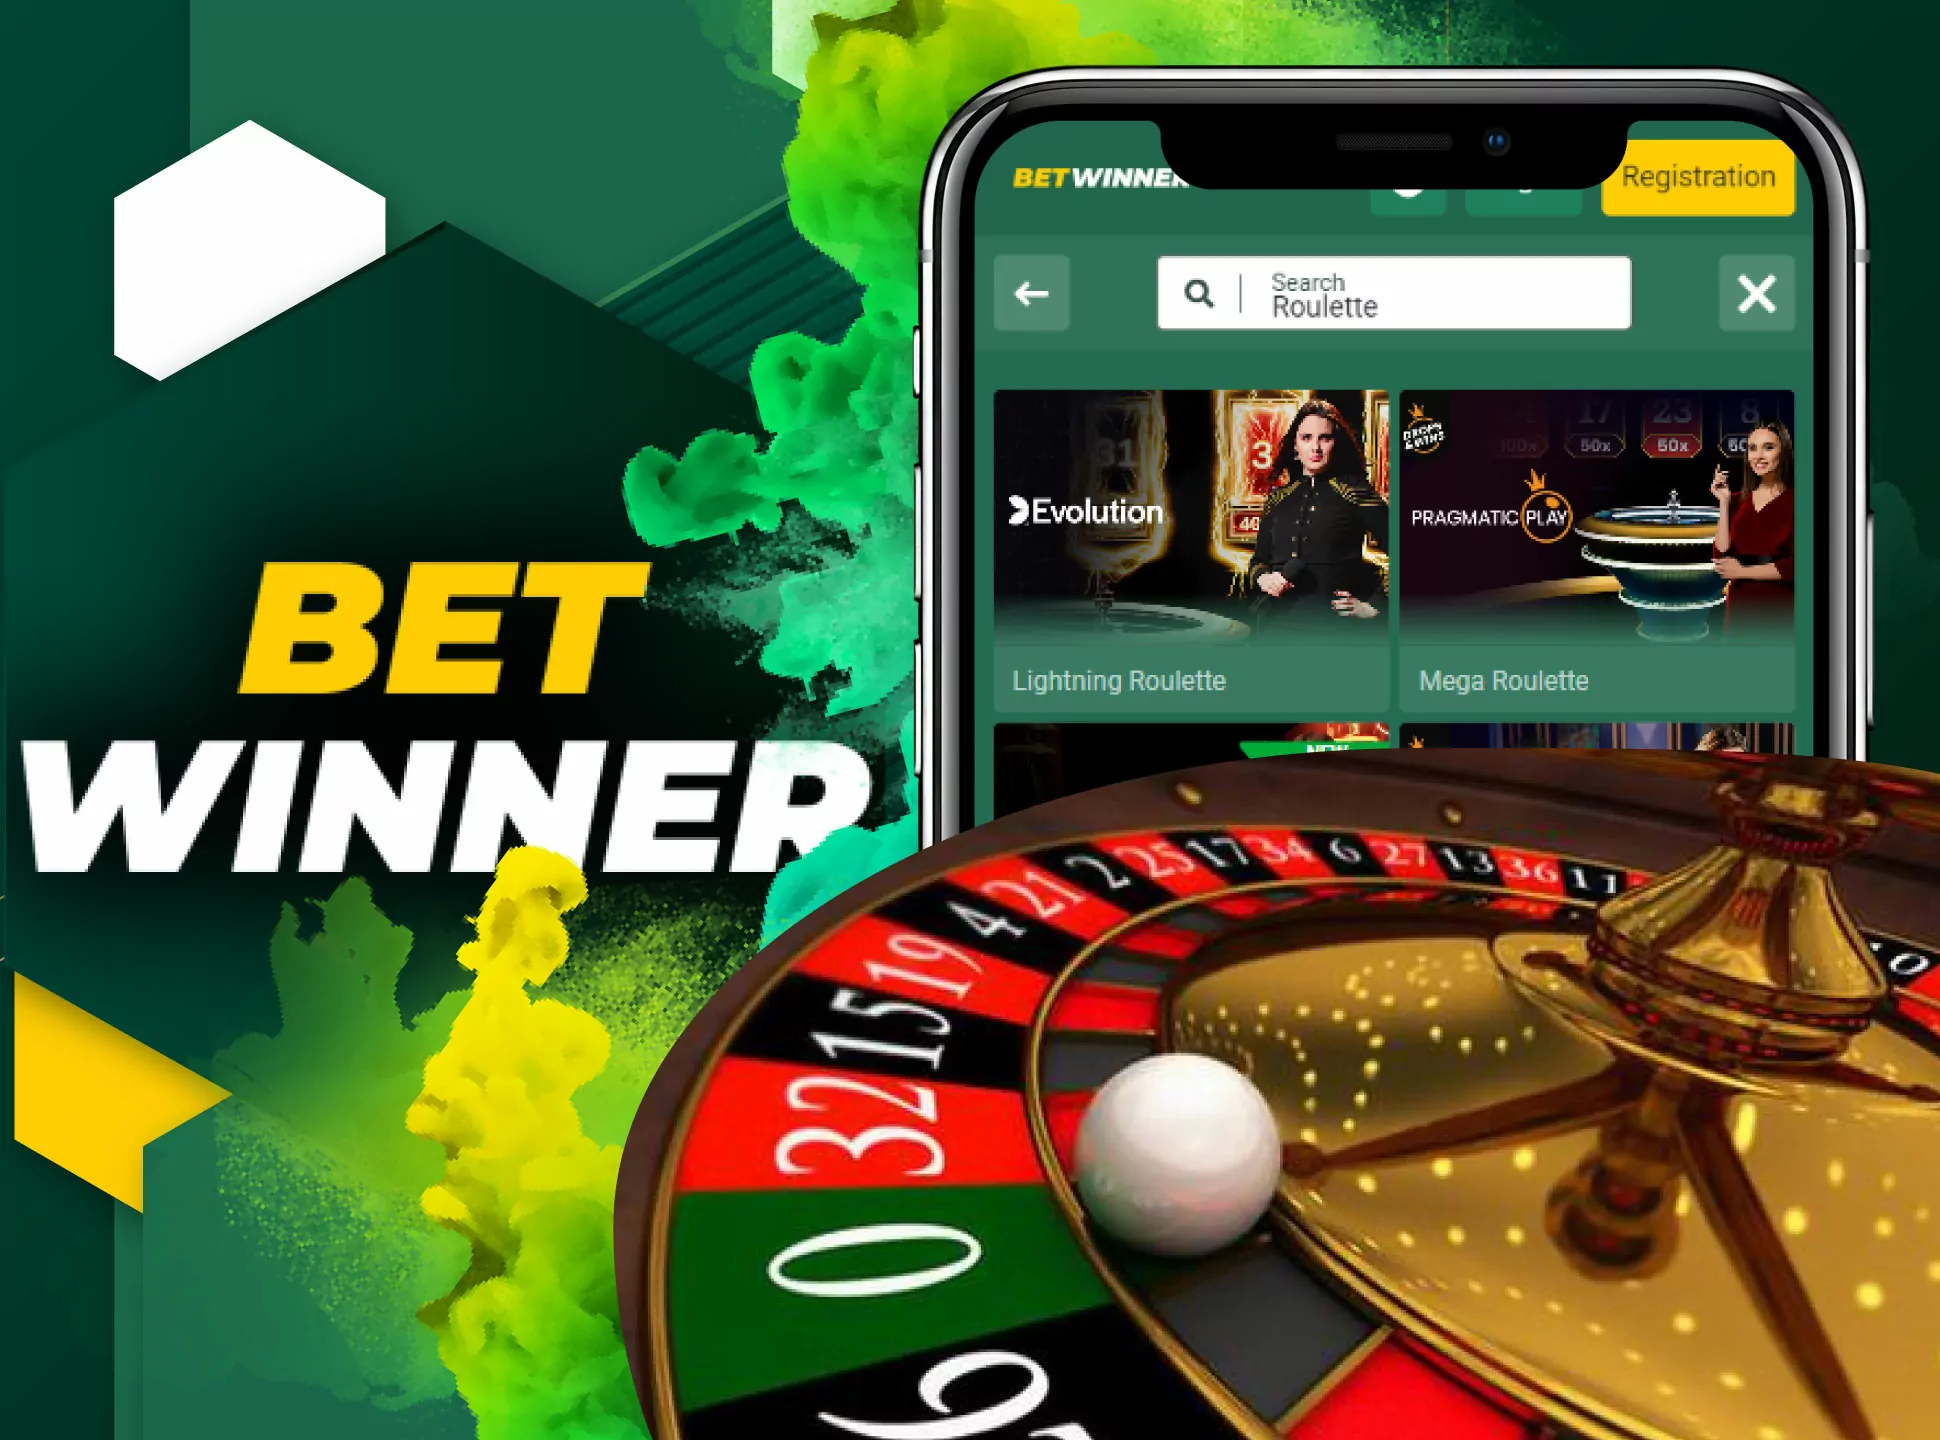 Spin the roulette and win money.